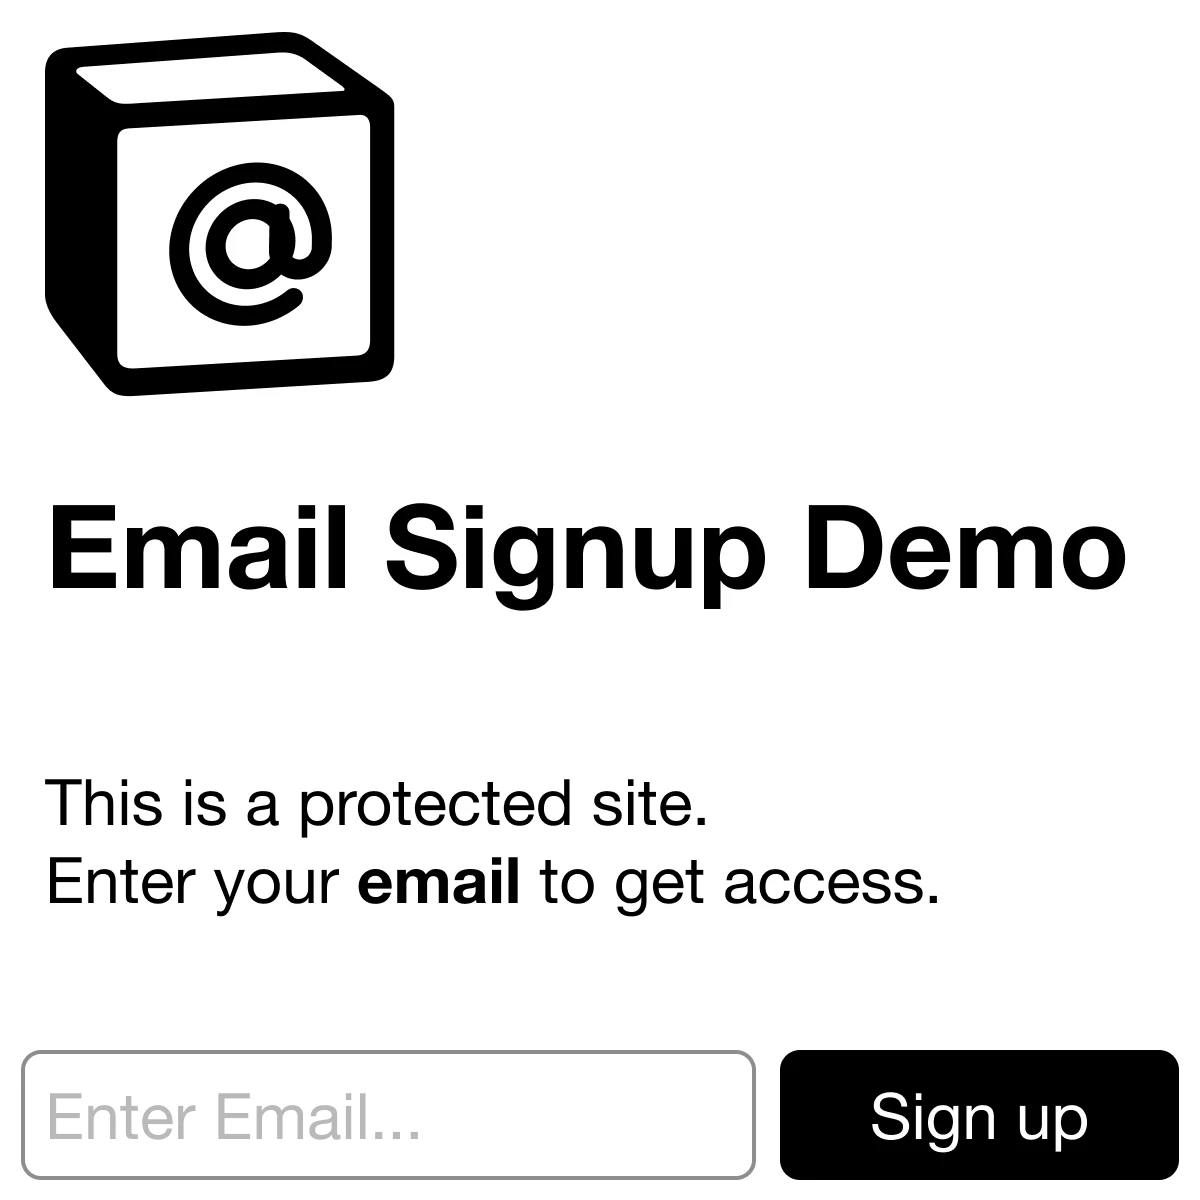 Sotion Email Signup Demo